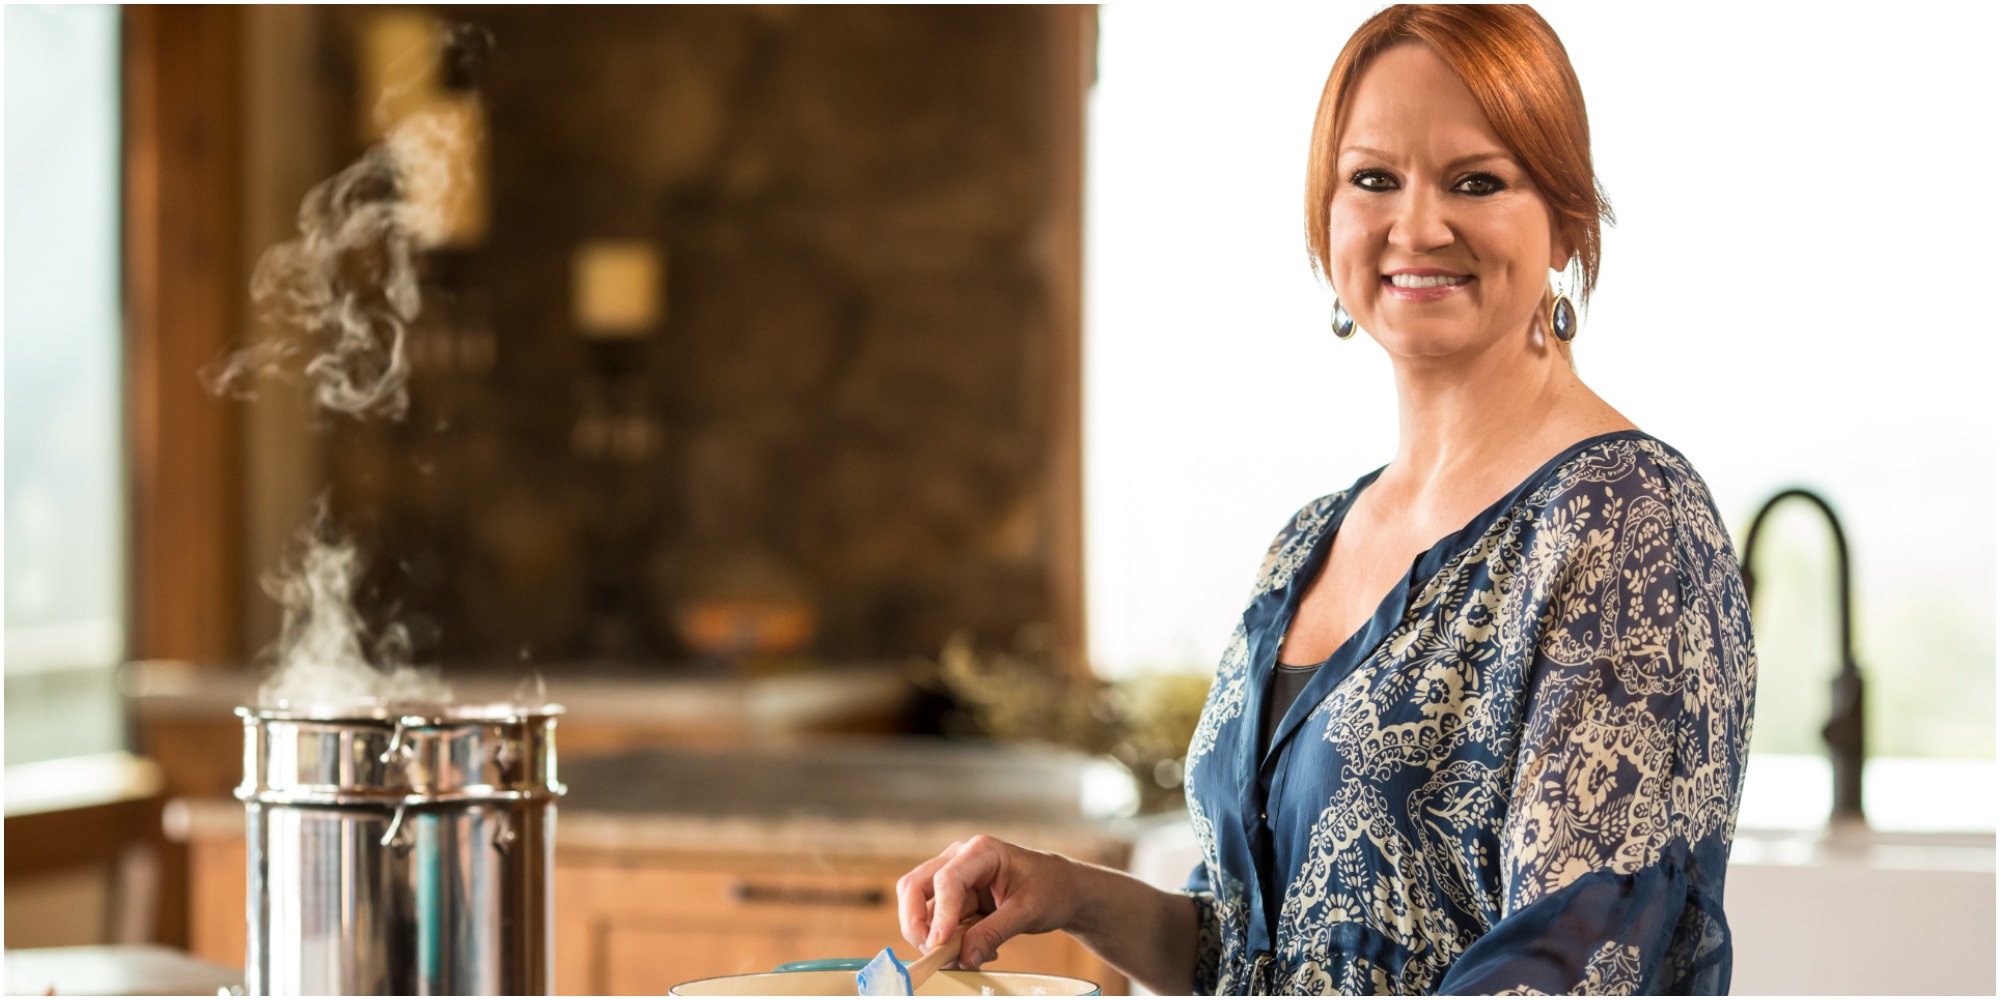 Ree Drummond in his home kitchen in Oklahoma.